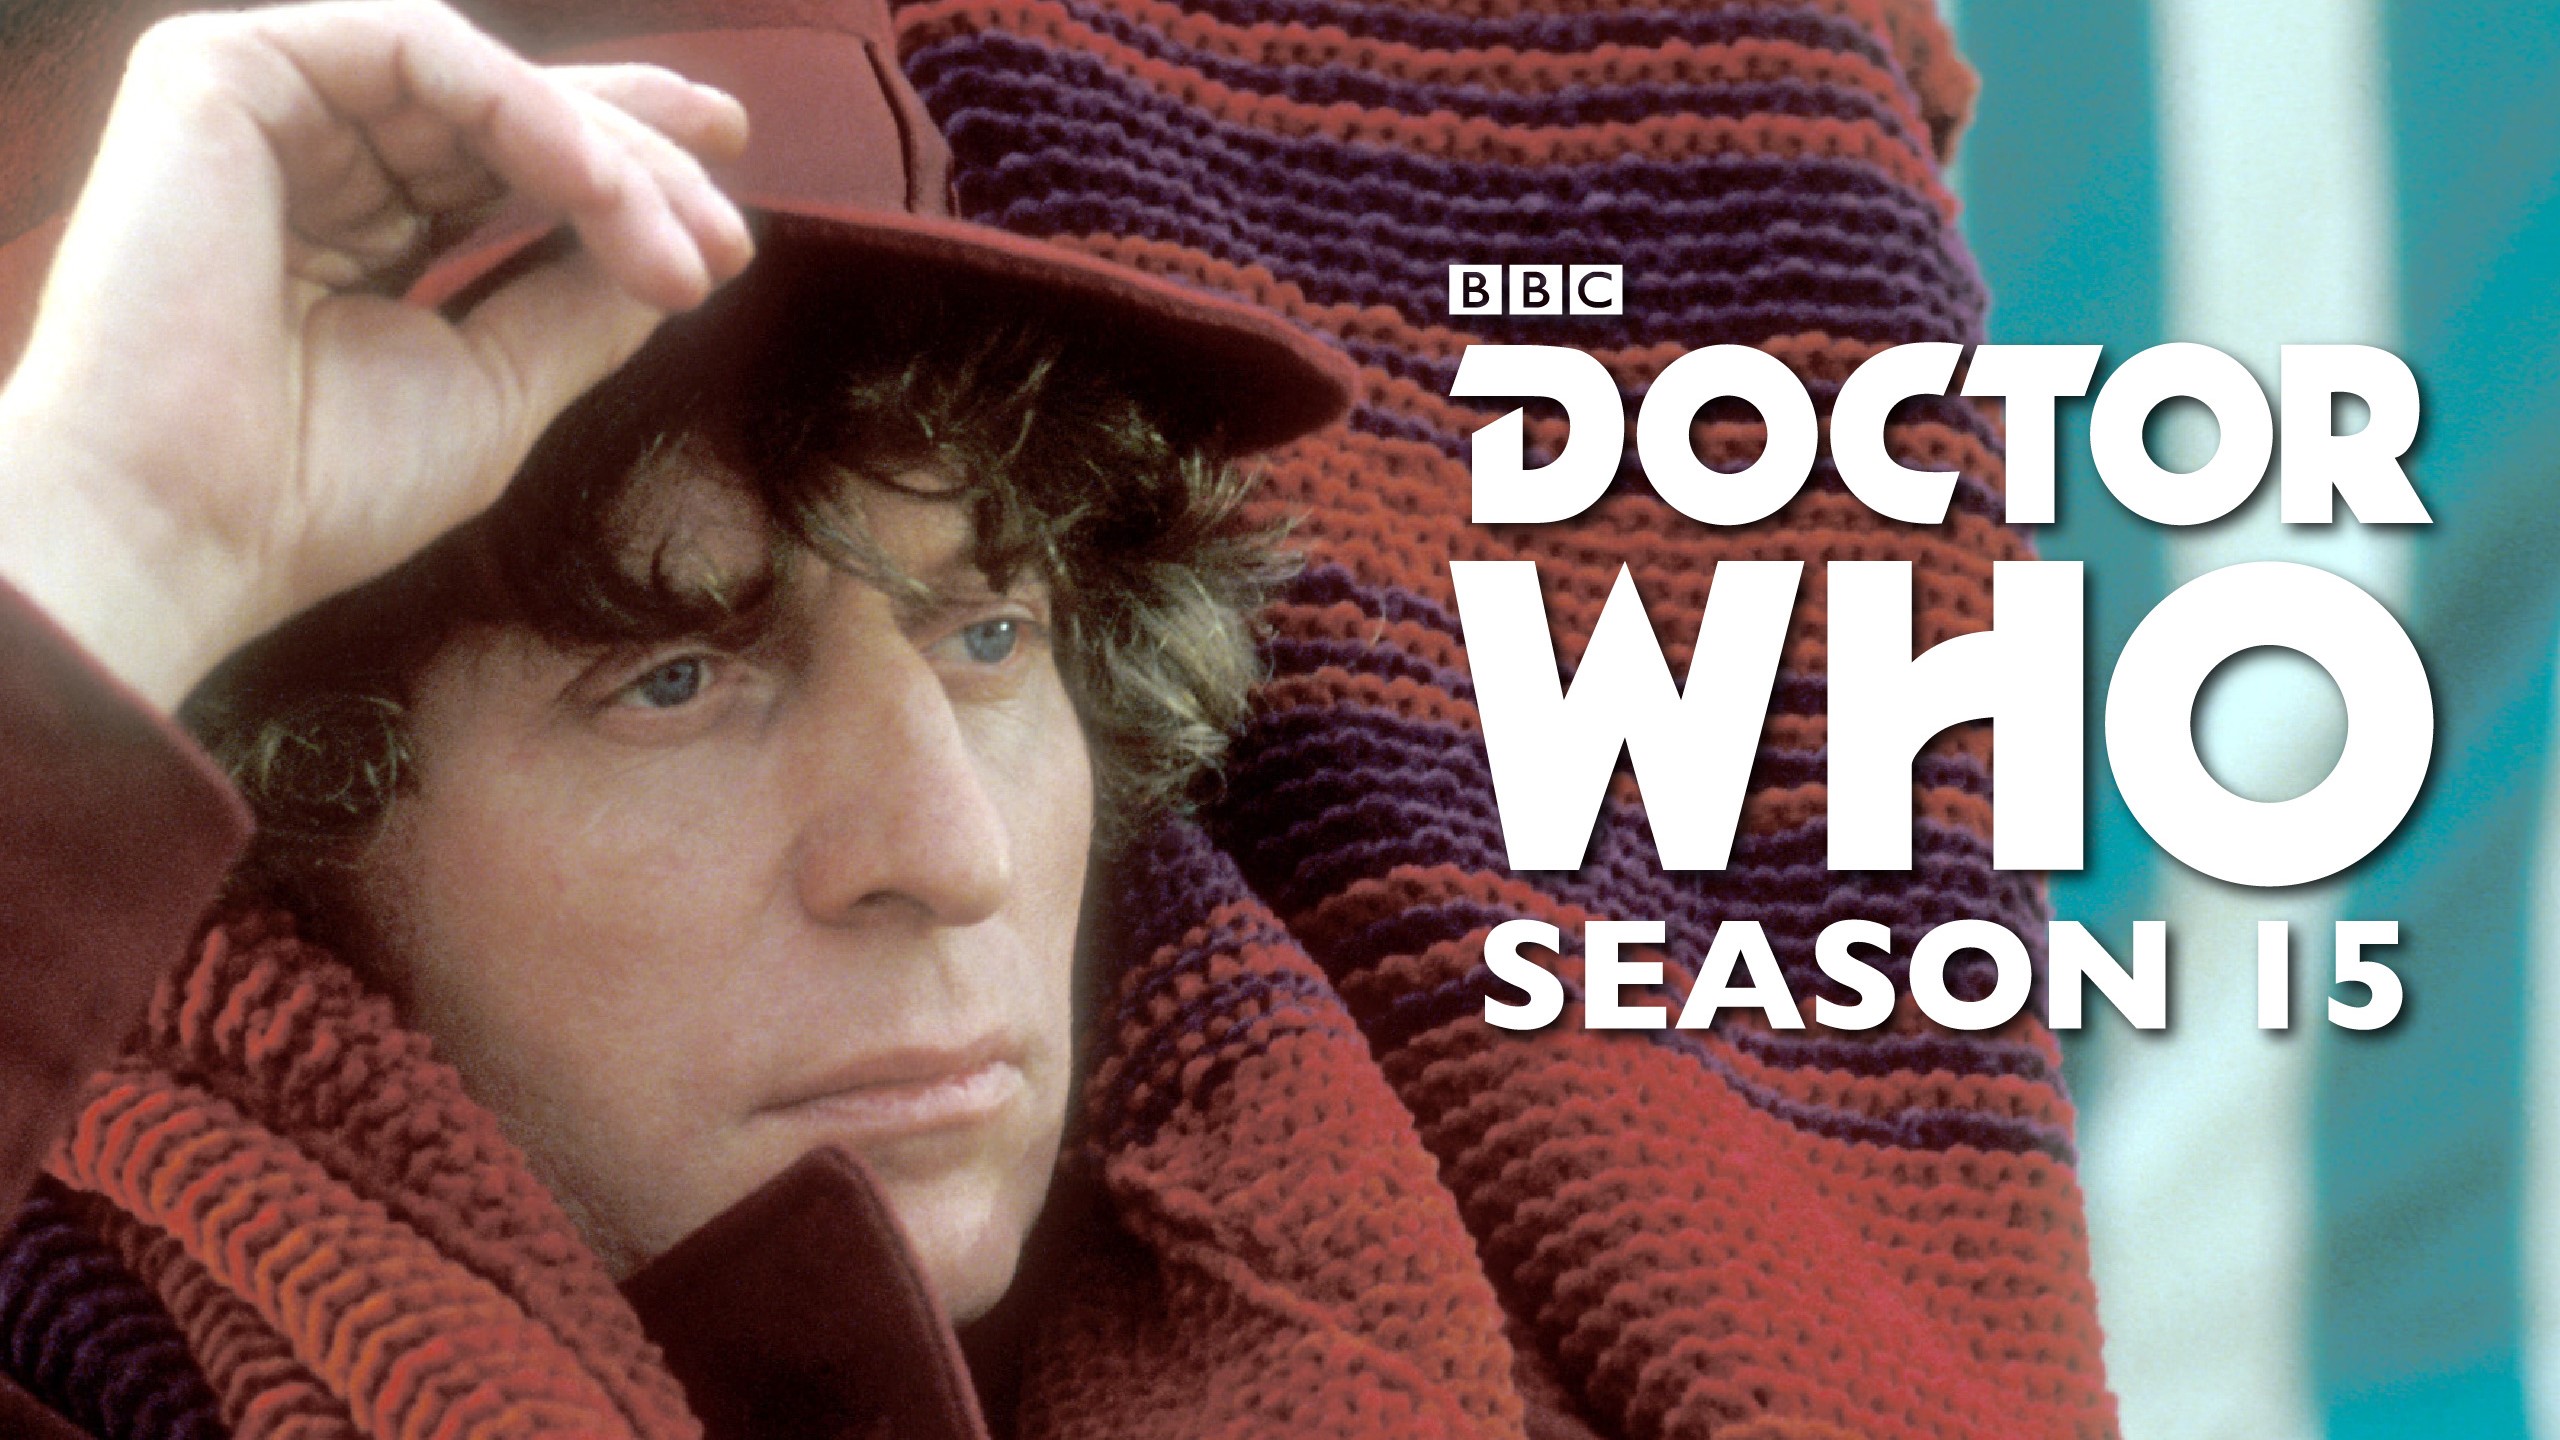 Doctor Who - watch tv show streaming online